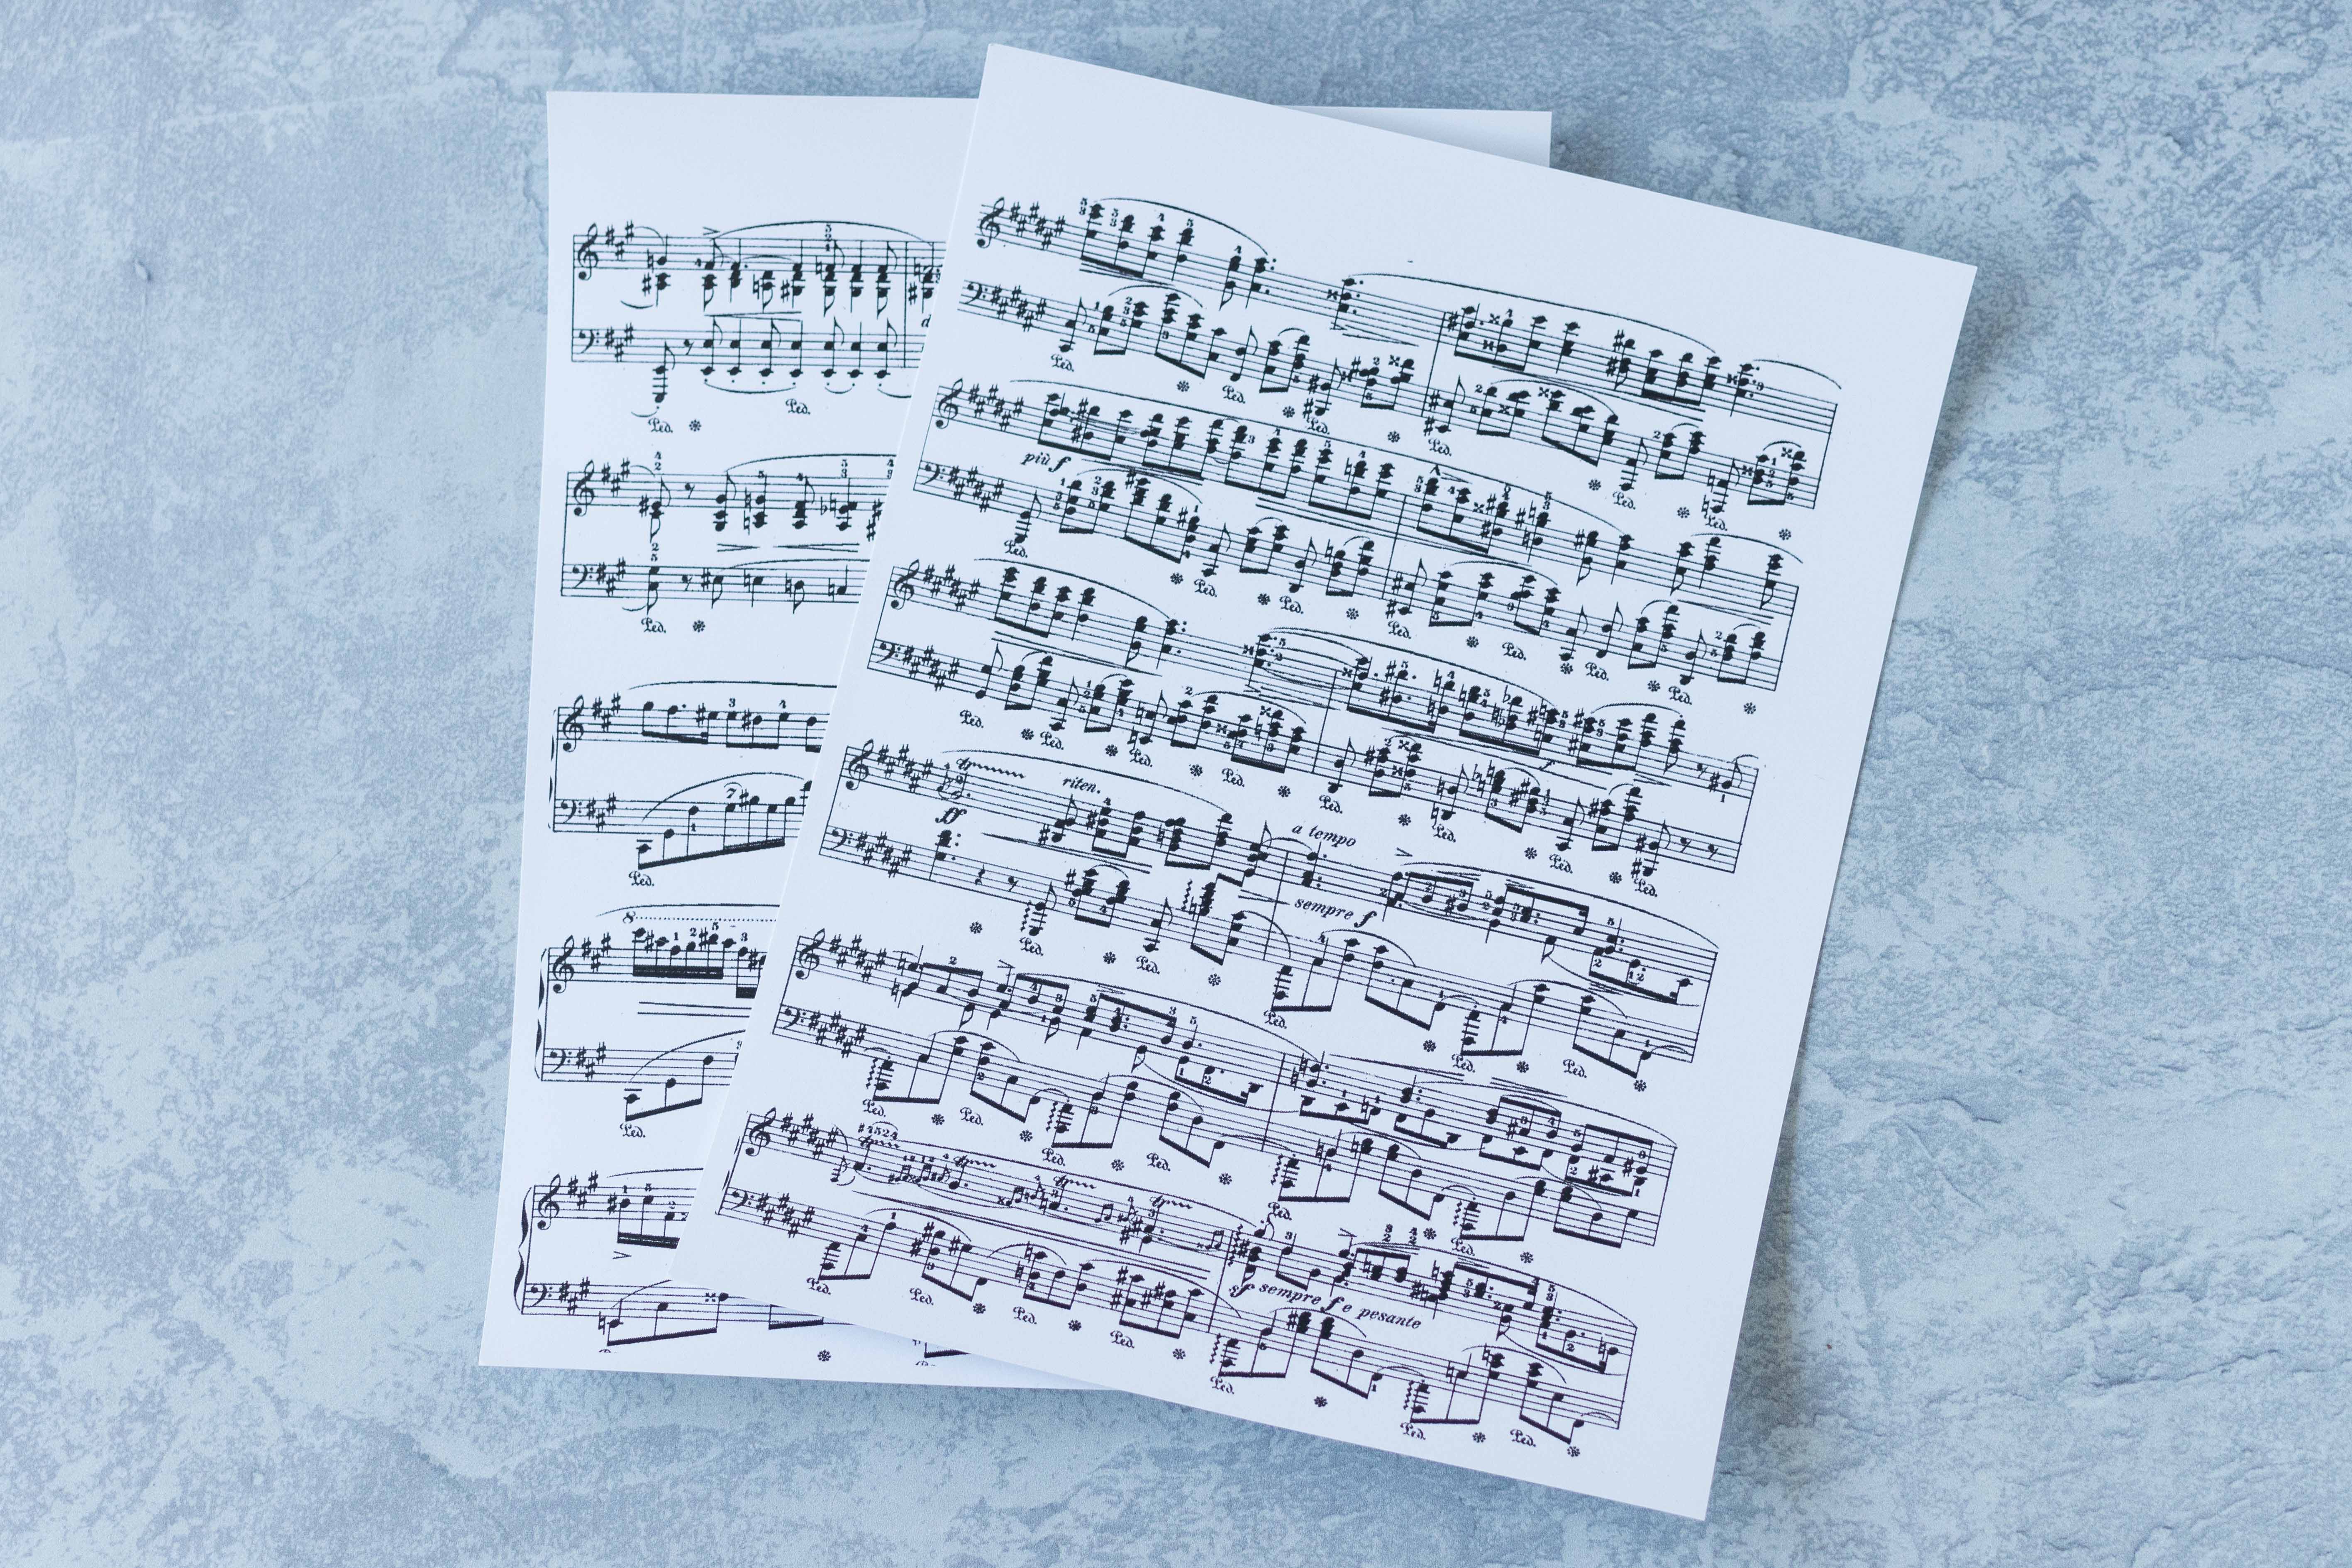 Sheet music printed on white card stock ready to be antiqued for DIY tile coasters. #DIY #tilecoasters #sheetmusiccraft | https://www.roseclearfield.com